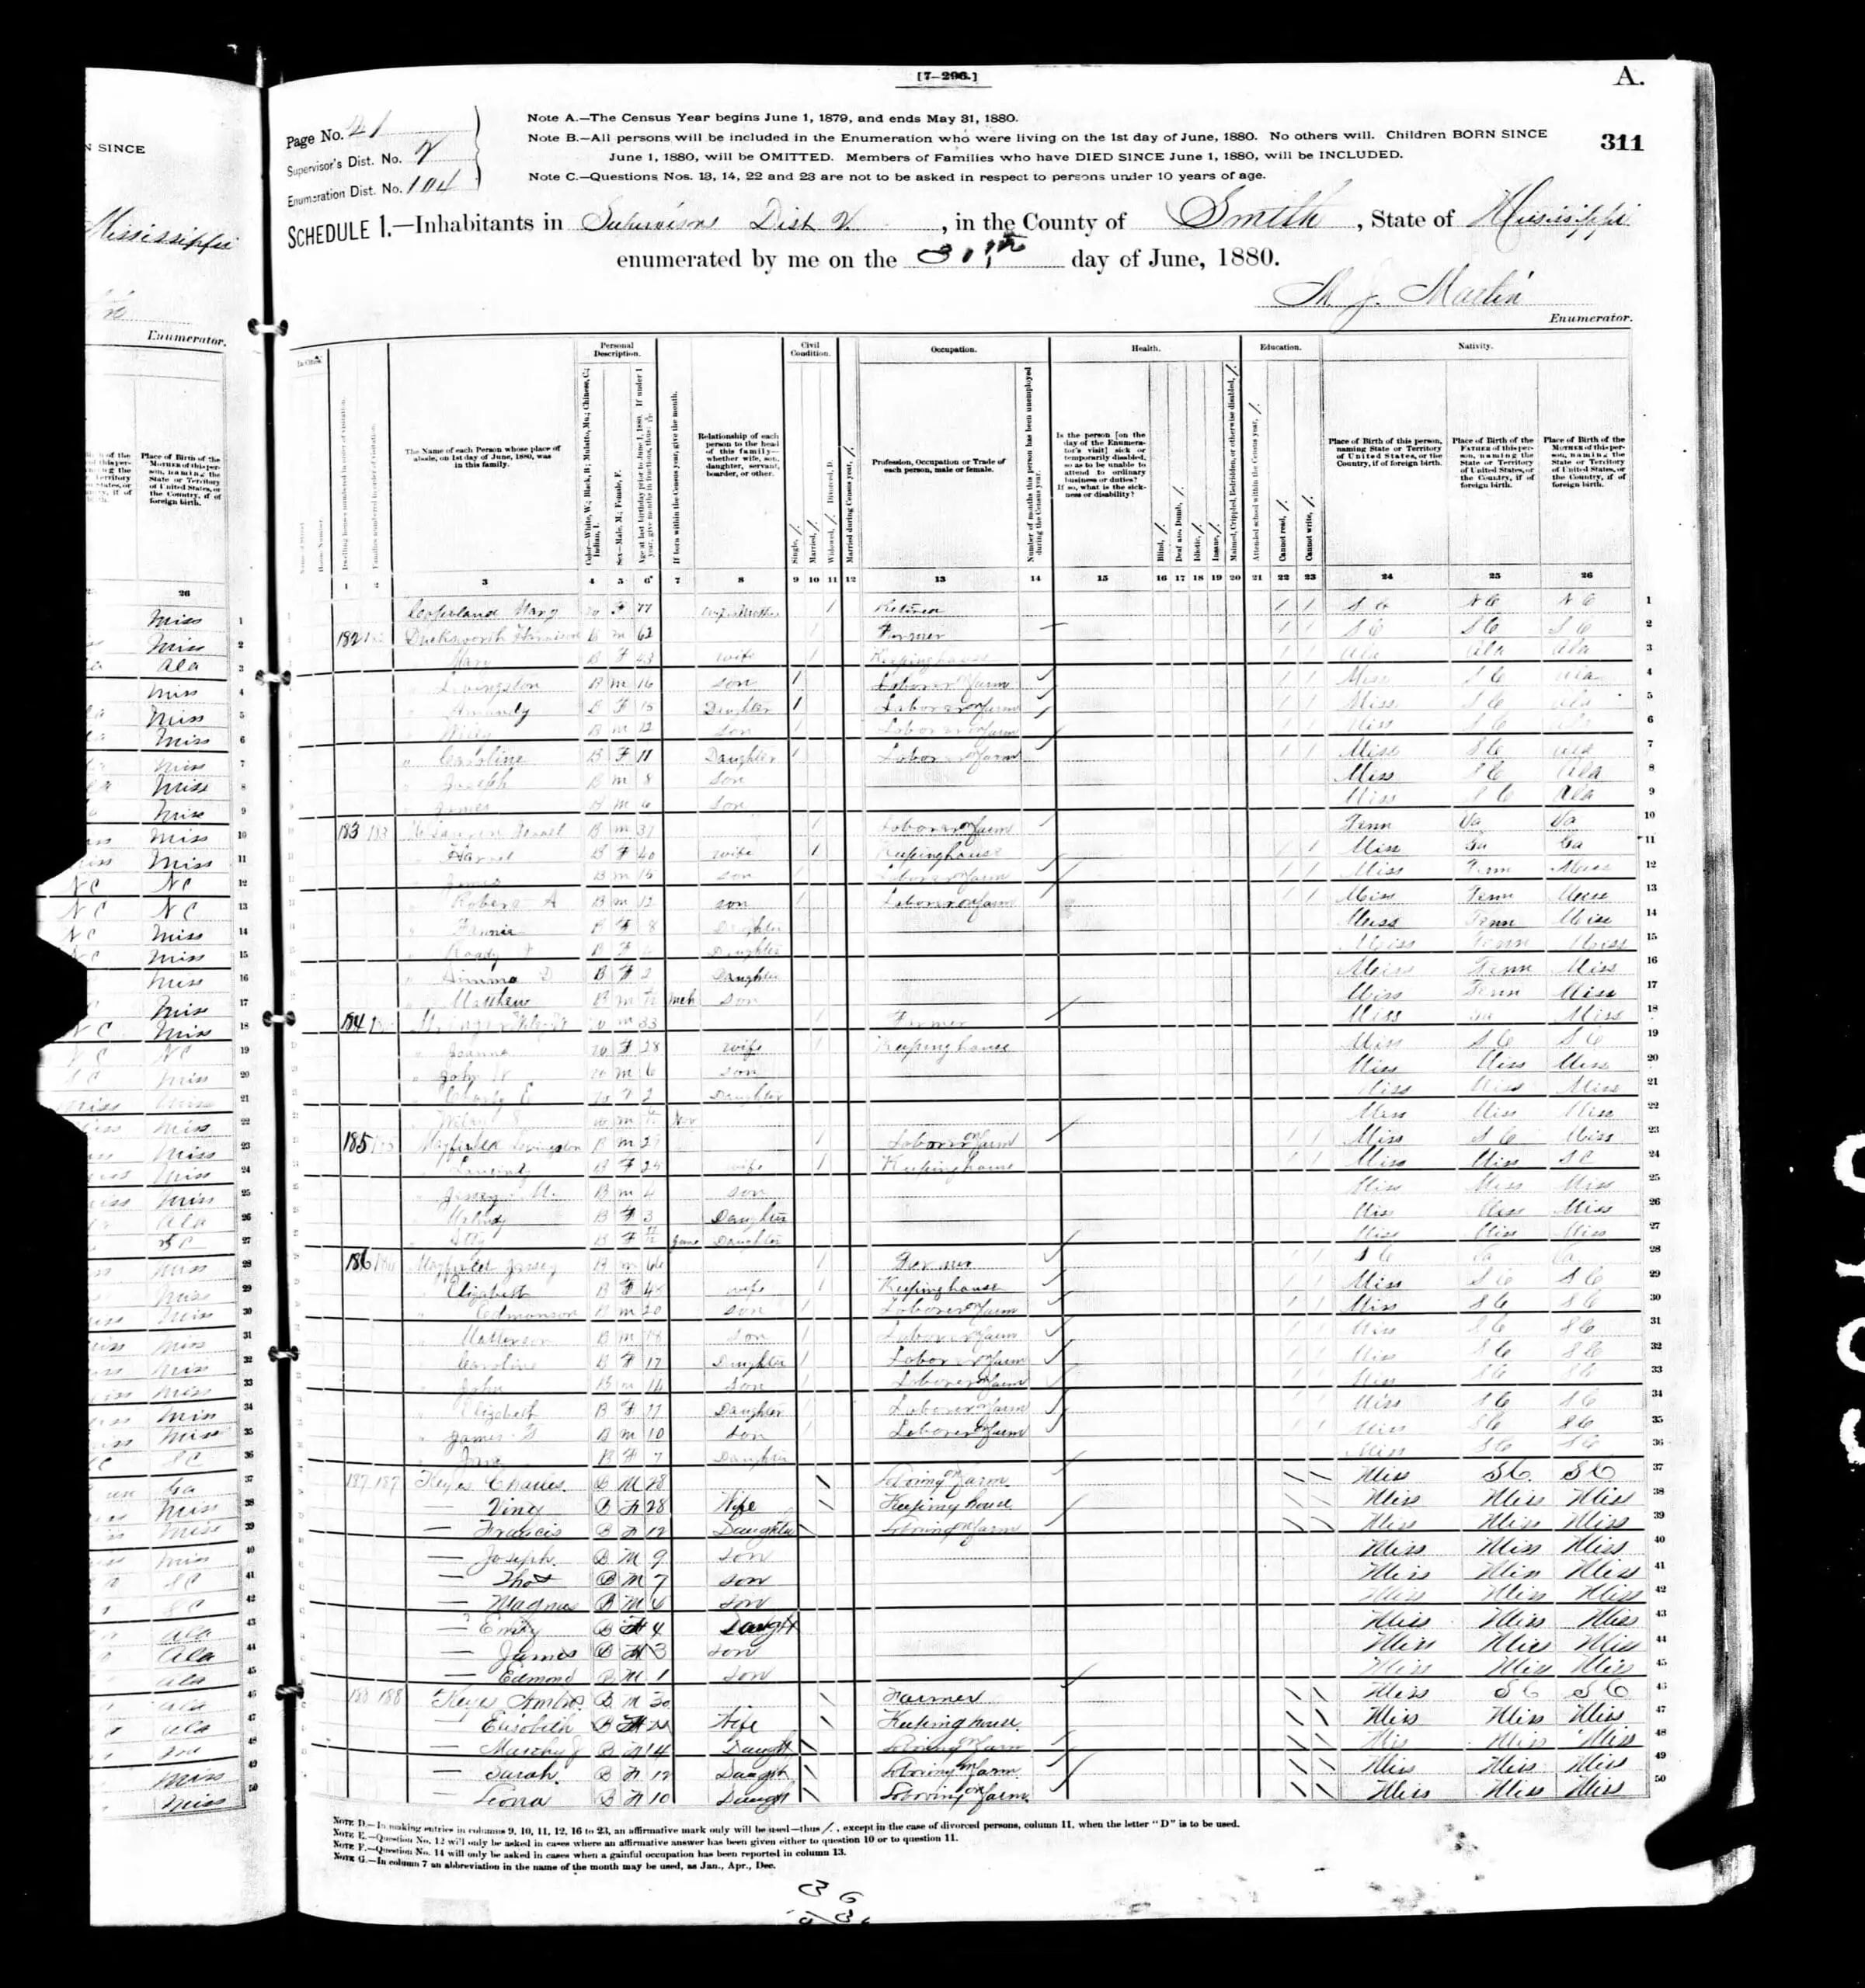 1880 census was used in my article the Life Story of Harrison Duckworth, My Great Great Grandfather.